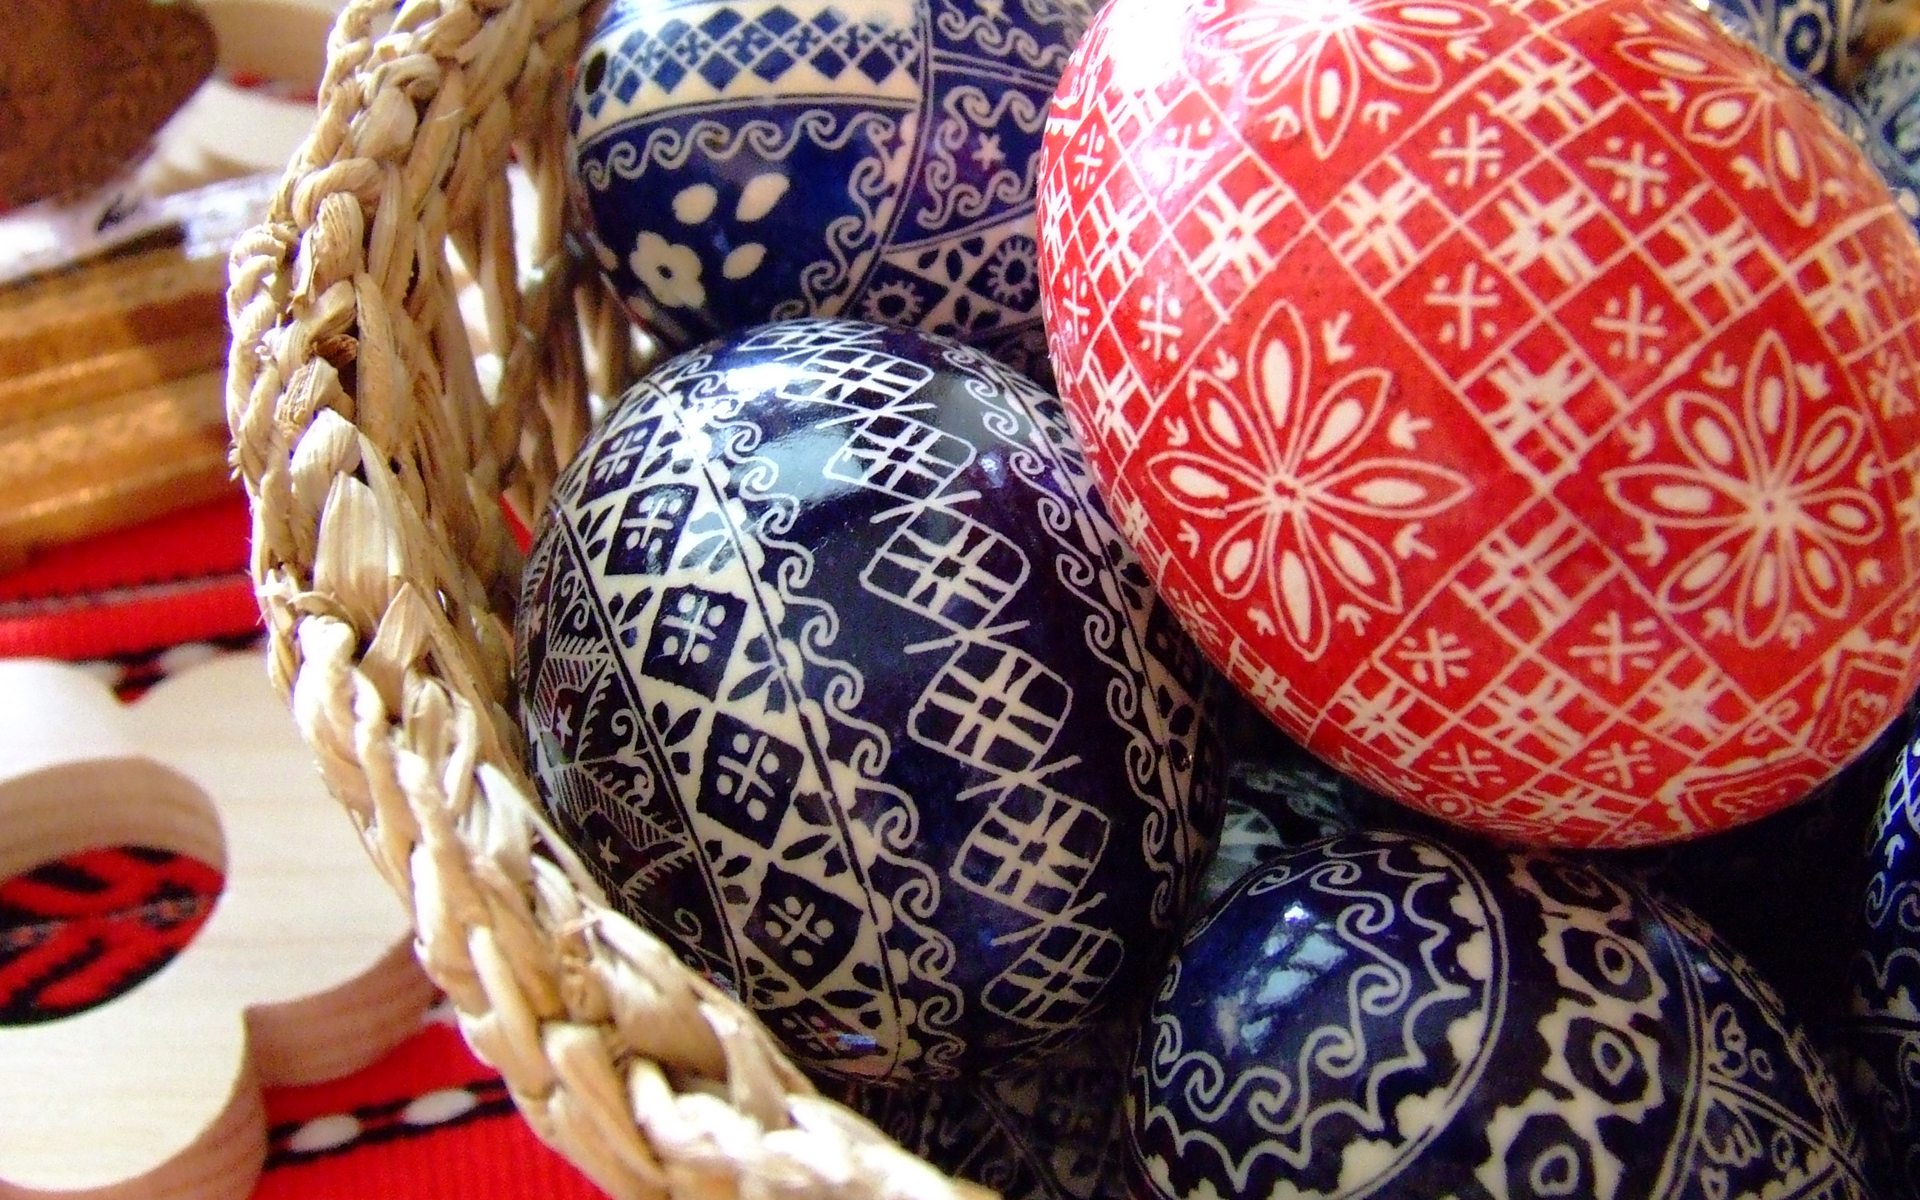 The blue and red Easter eggs